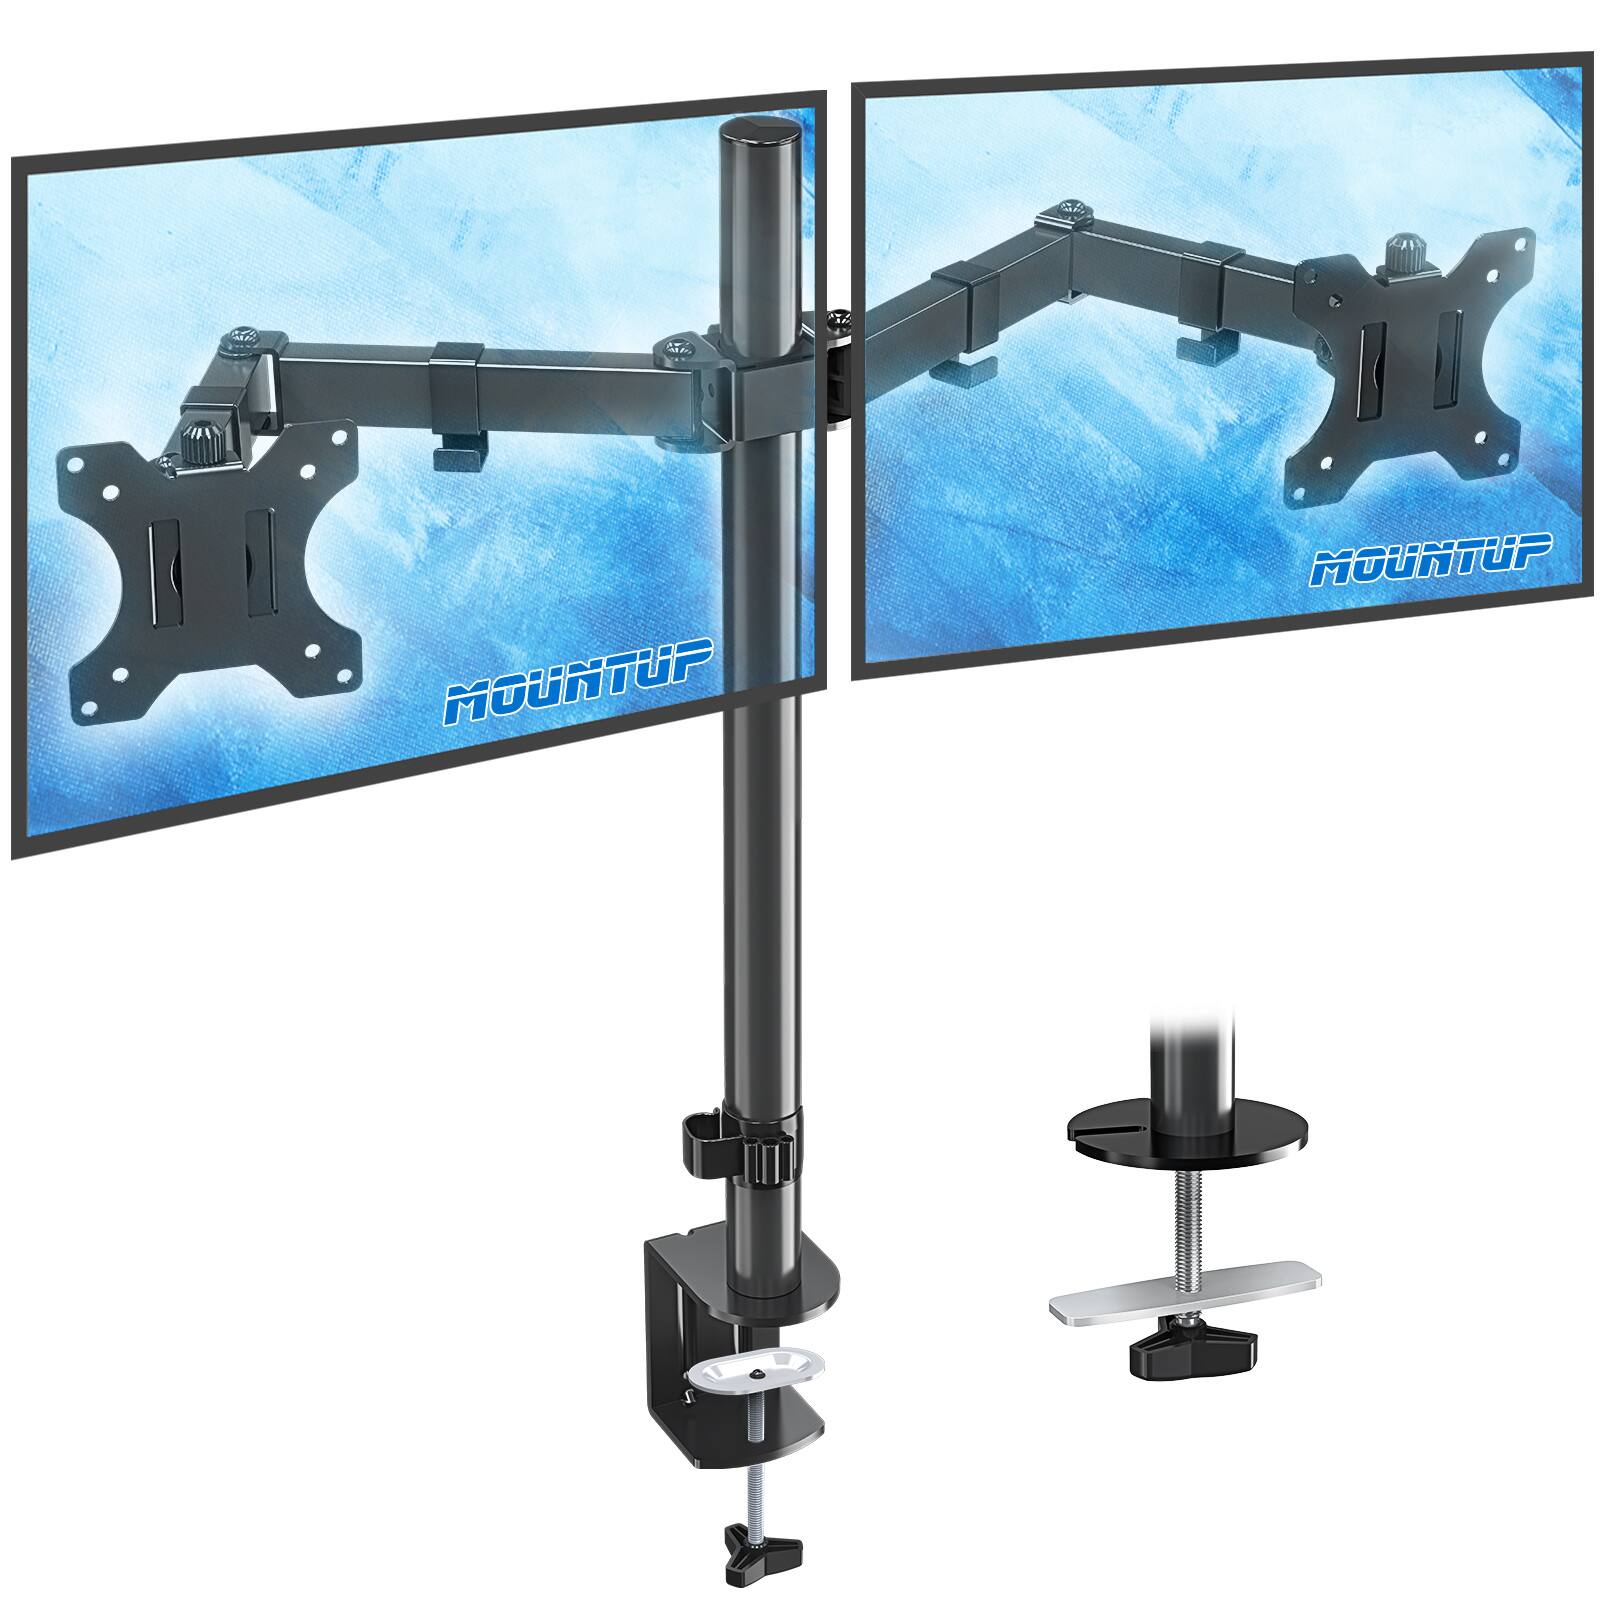 MOUNTUP Adjustable Dual Monitor Mount for 17"-27" Monitors for $14 + Free Shipping w/ Prime or orders $25+